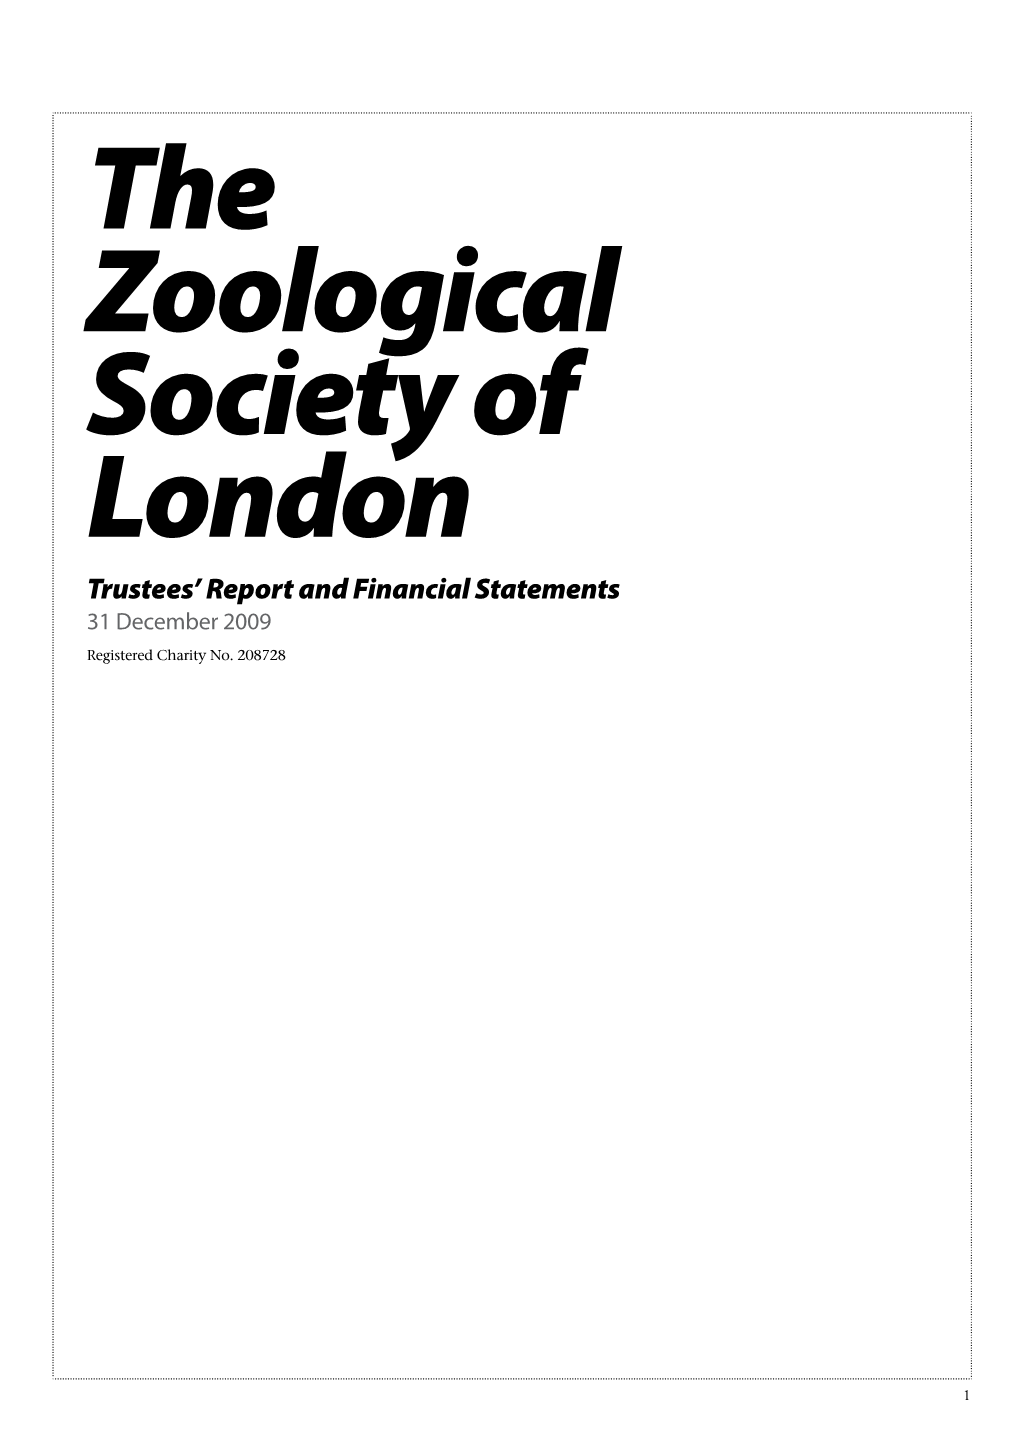 ZSL Trustees Report and Financial Statements